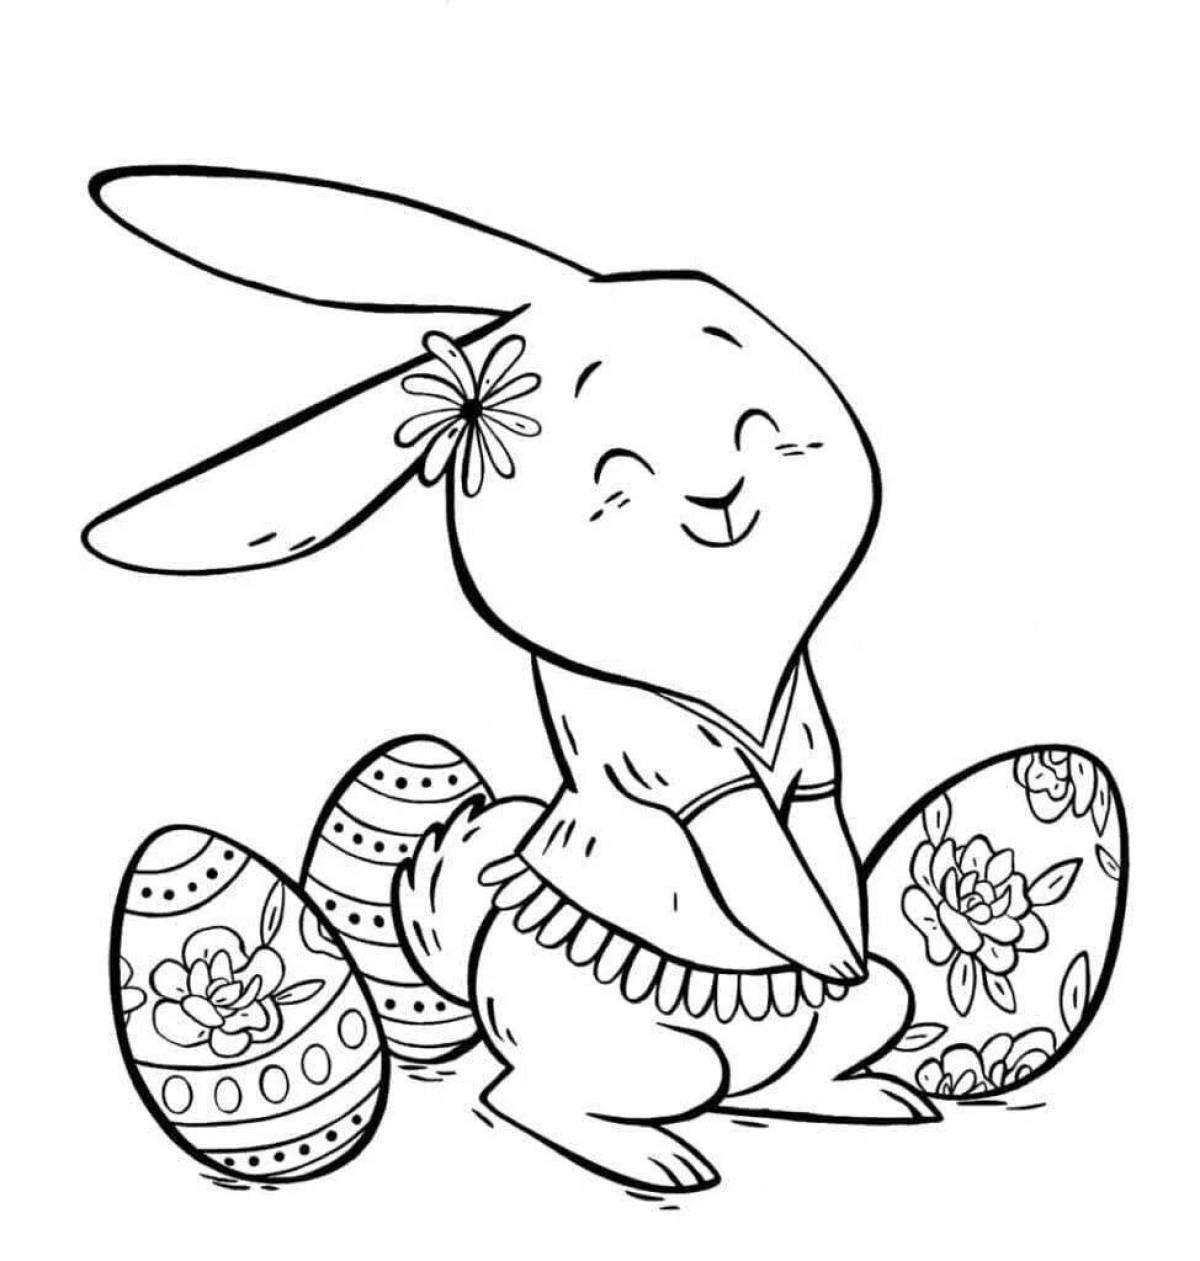 Colouring easter bunny